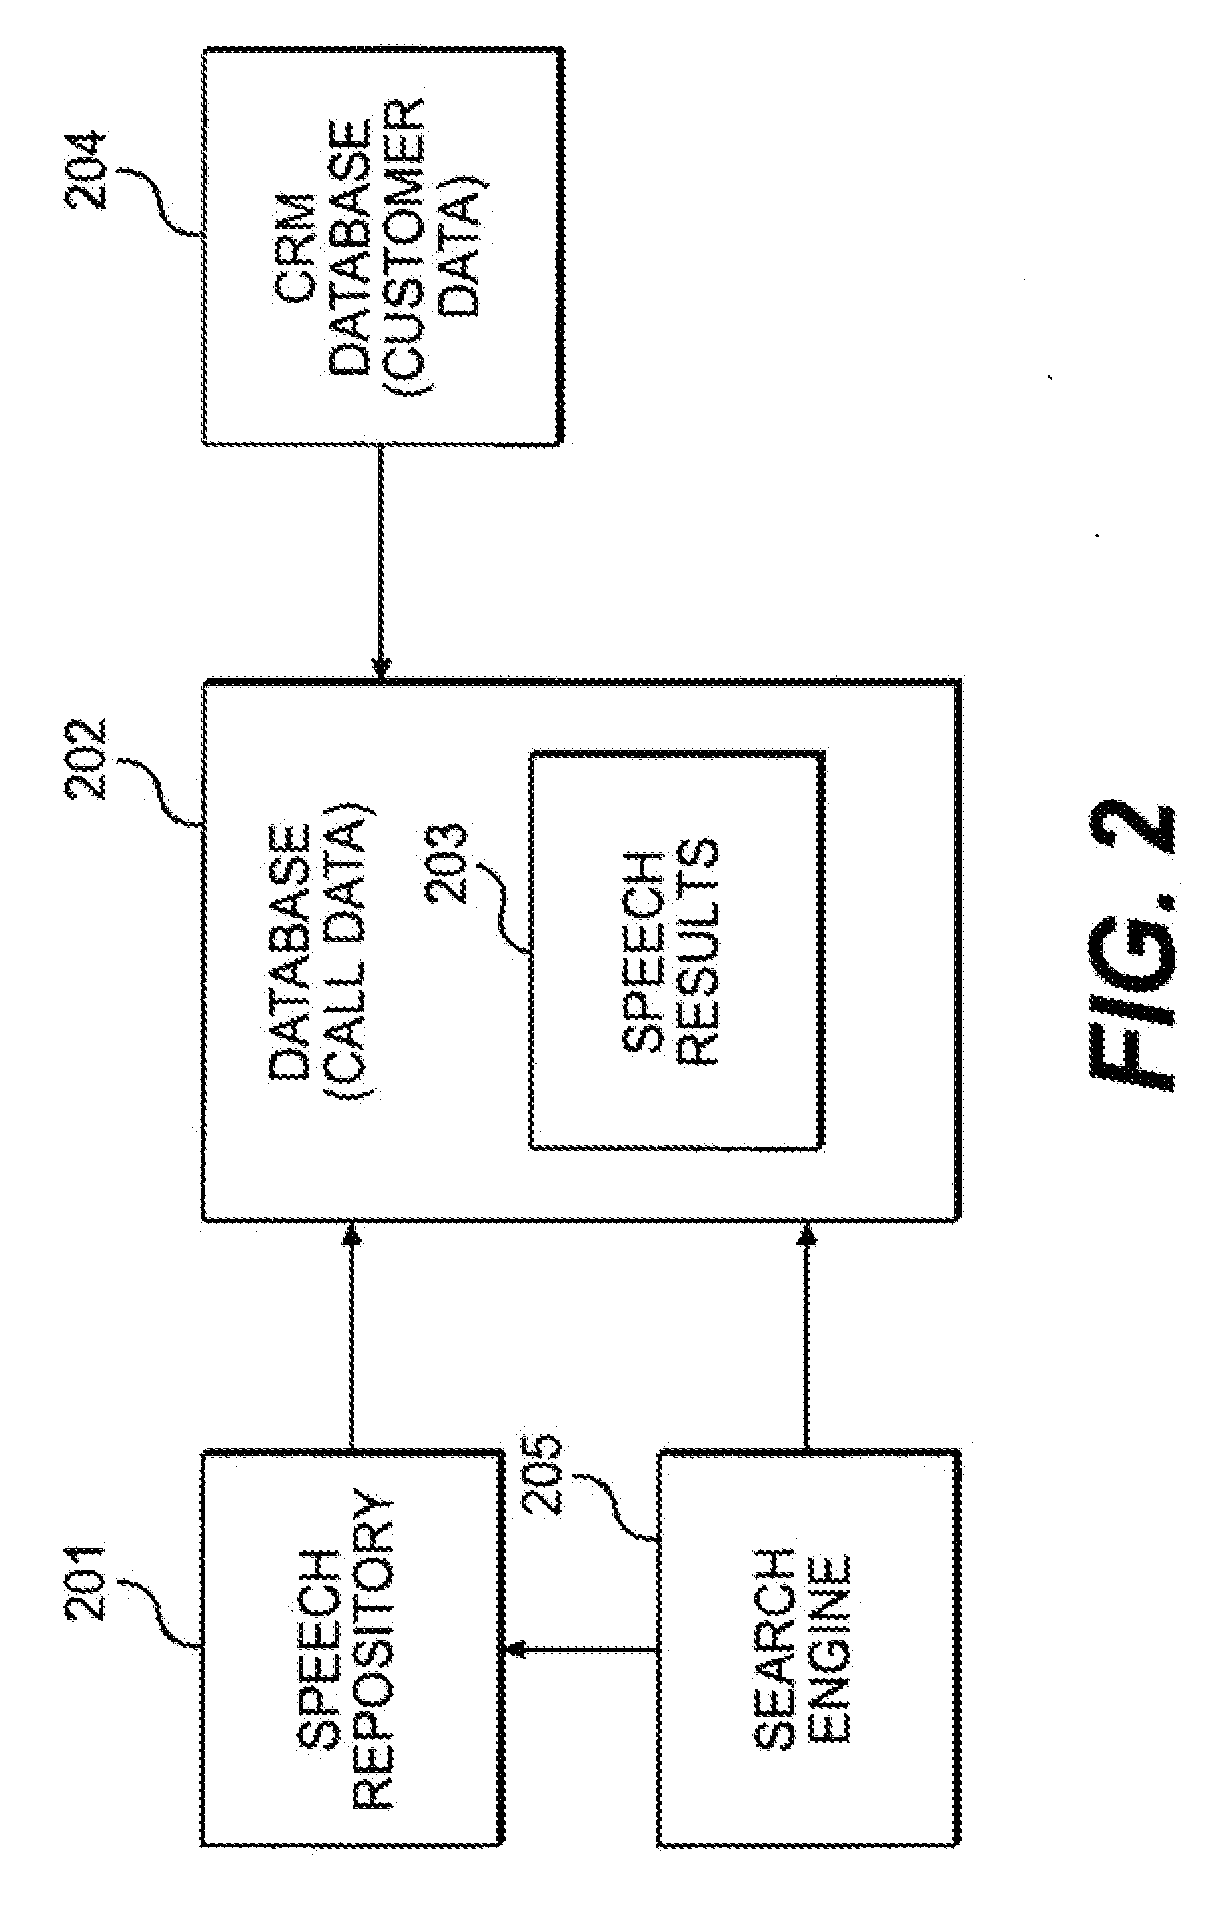 Methods and apparatus for audio data monitoring and evaluation using speech recognition